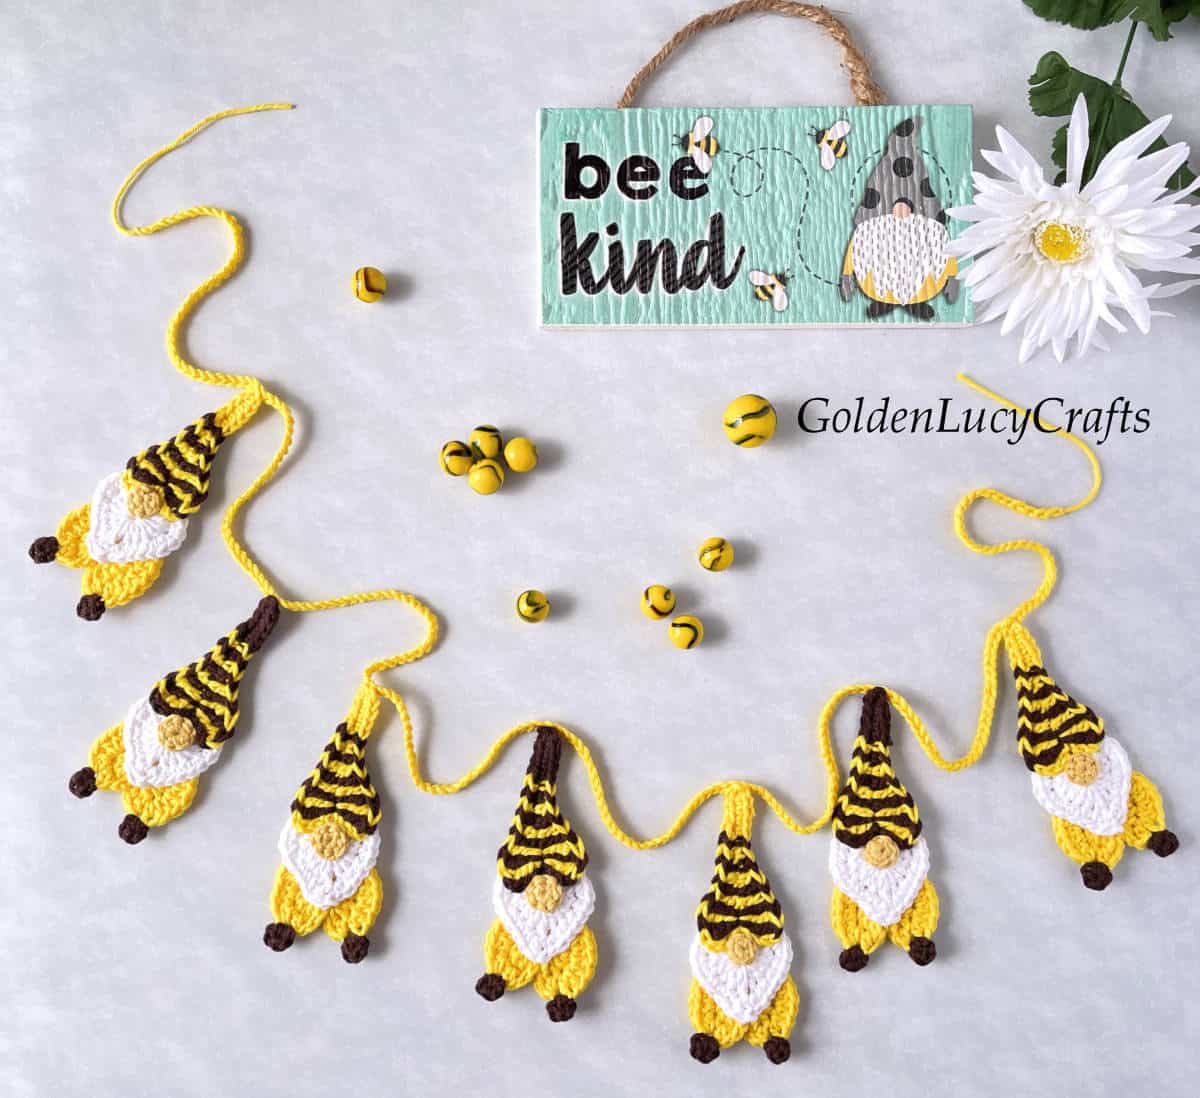 Crochet bee gnome garland, sign saying Bee Kind.